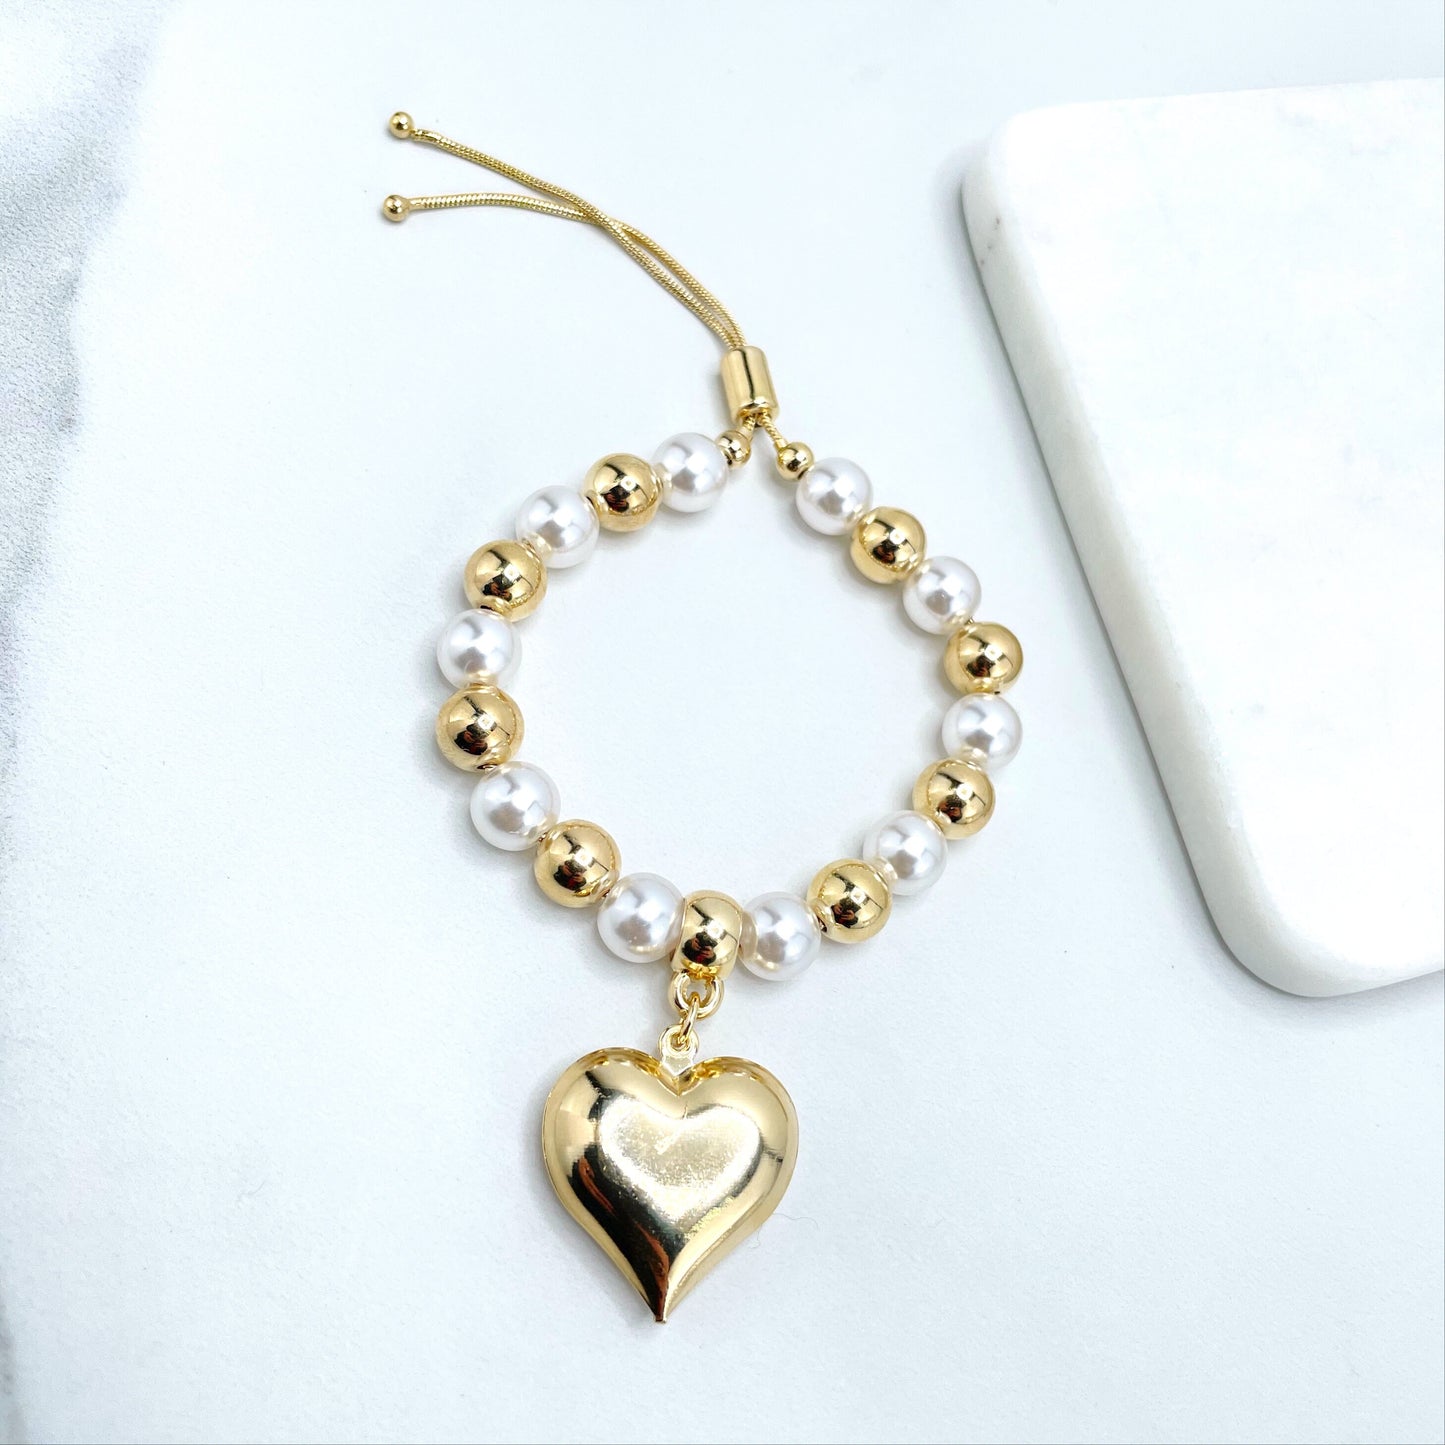 18k Gold Filled 1mm Box Chain with Gold Beads & Simulated Pearls, Heart Charm, Adjustable Beaded Bracelet, Wholesale Jewelry Making Supplies